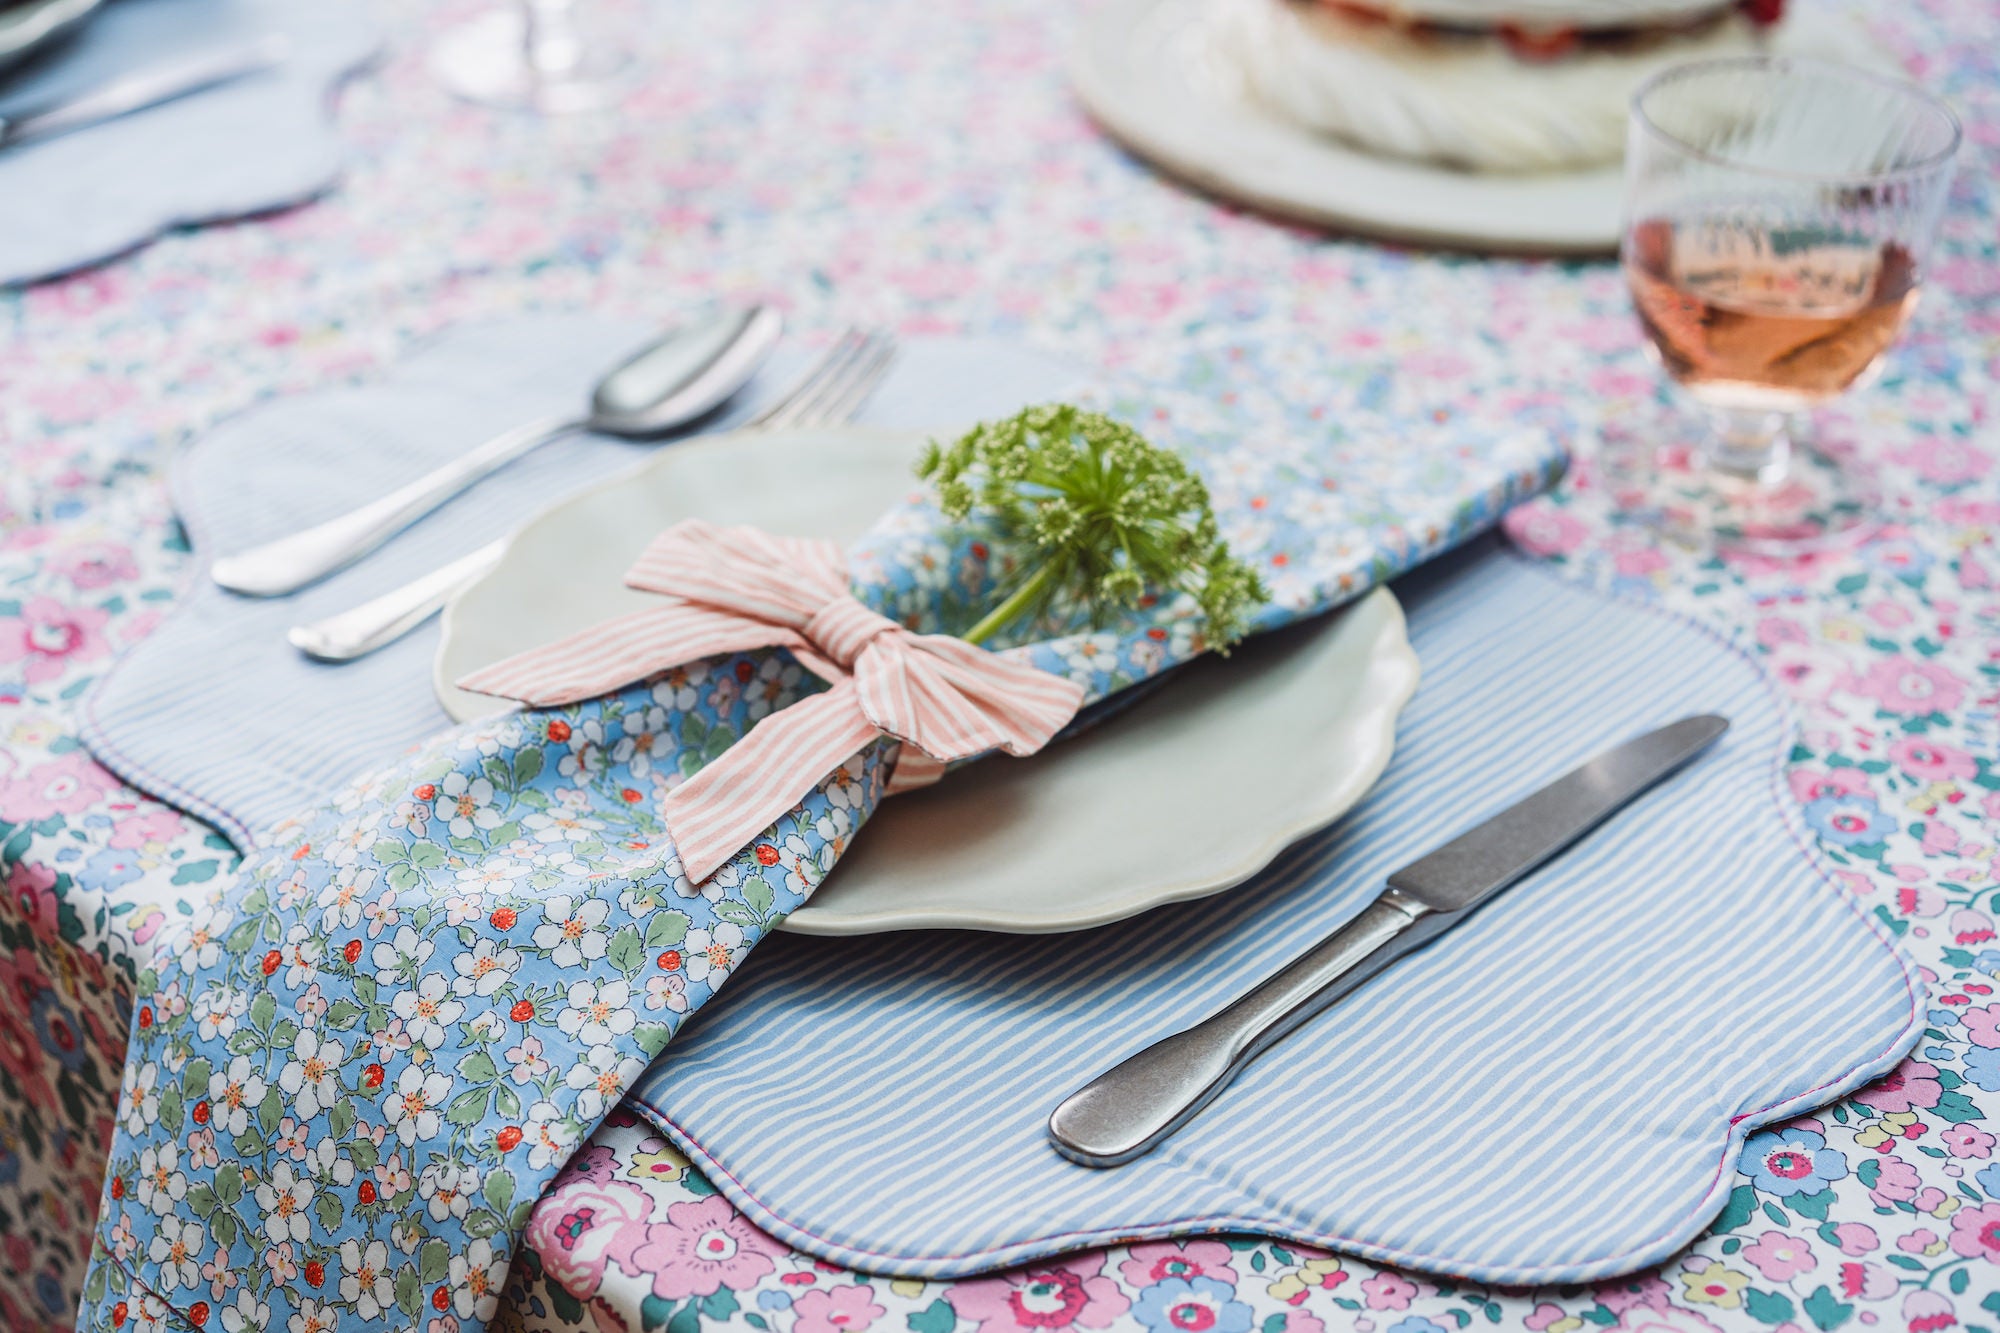 Coco & Wolf Liberty fabric dining accessories and table linen